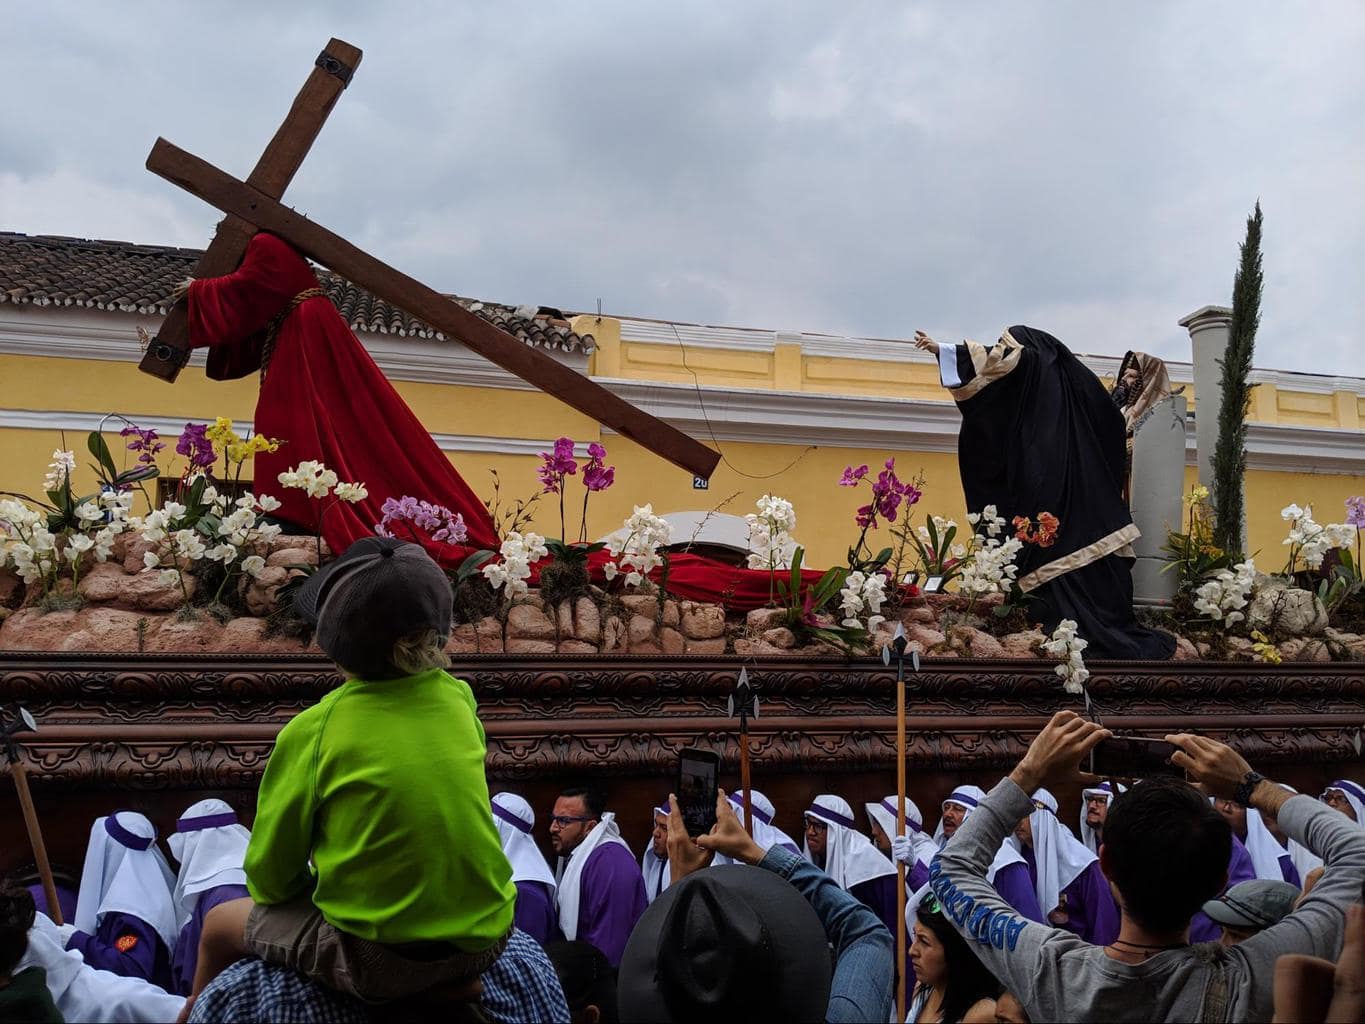 One of the Holy Week processions in Antigua Guatemala